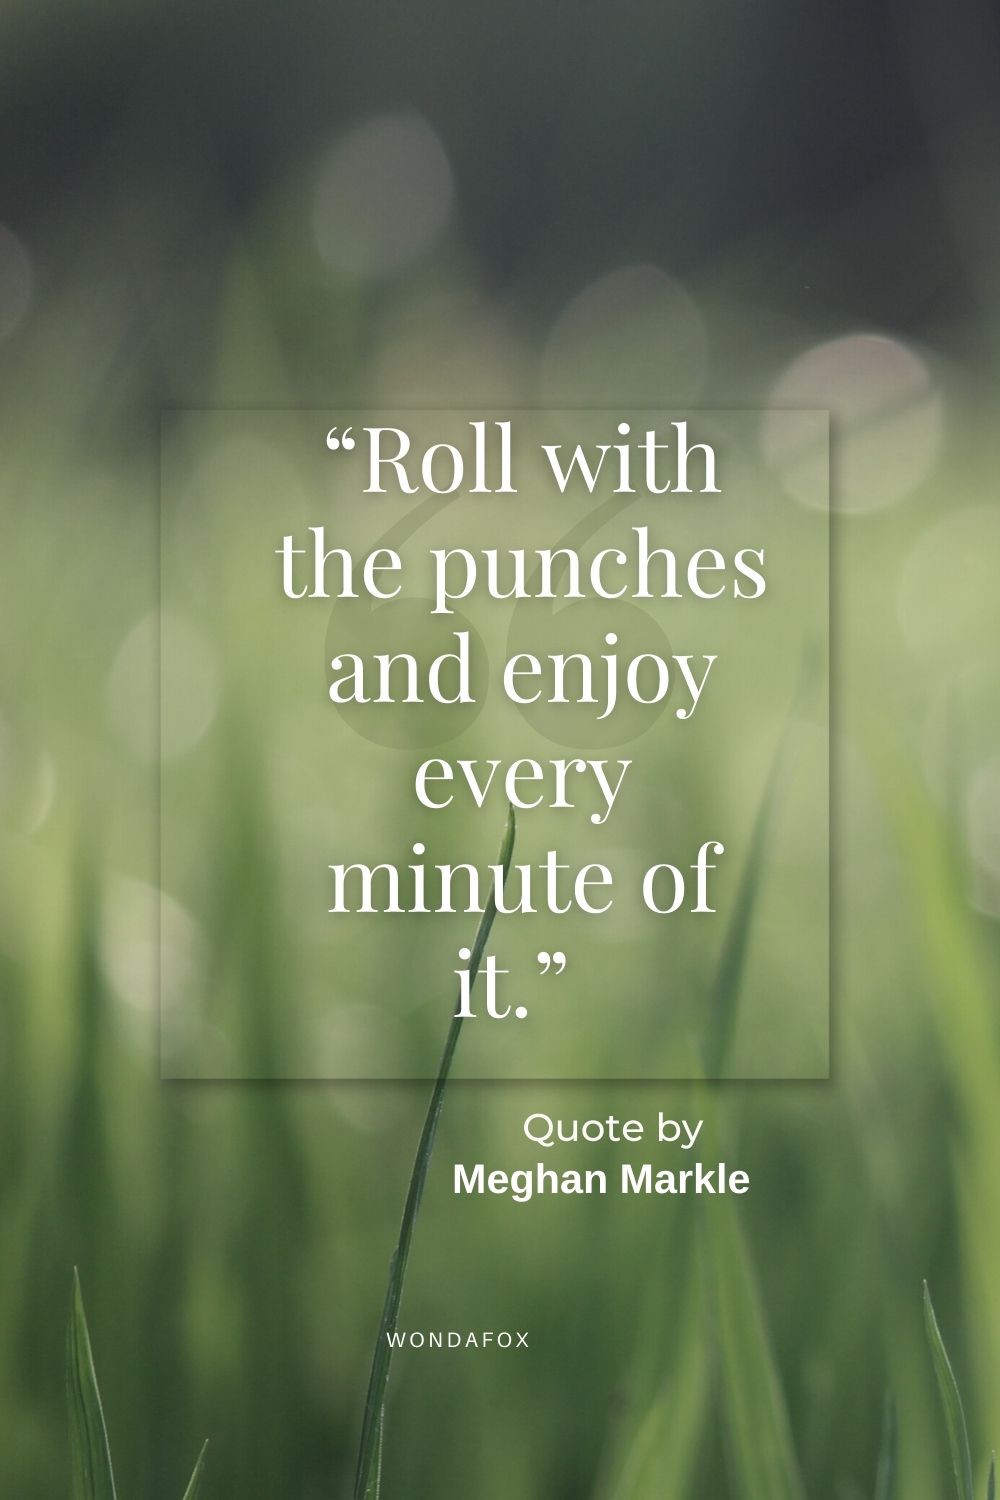 “Roll with the punches and enjoy every minute of it.” 
Meghan Markle